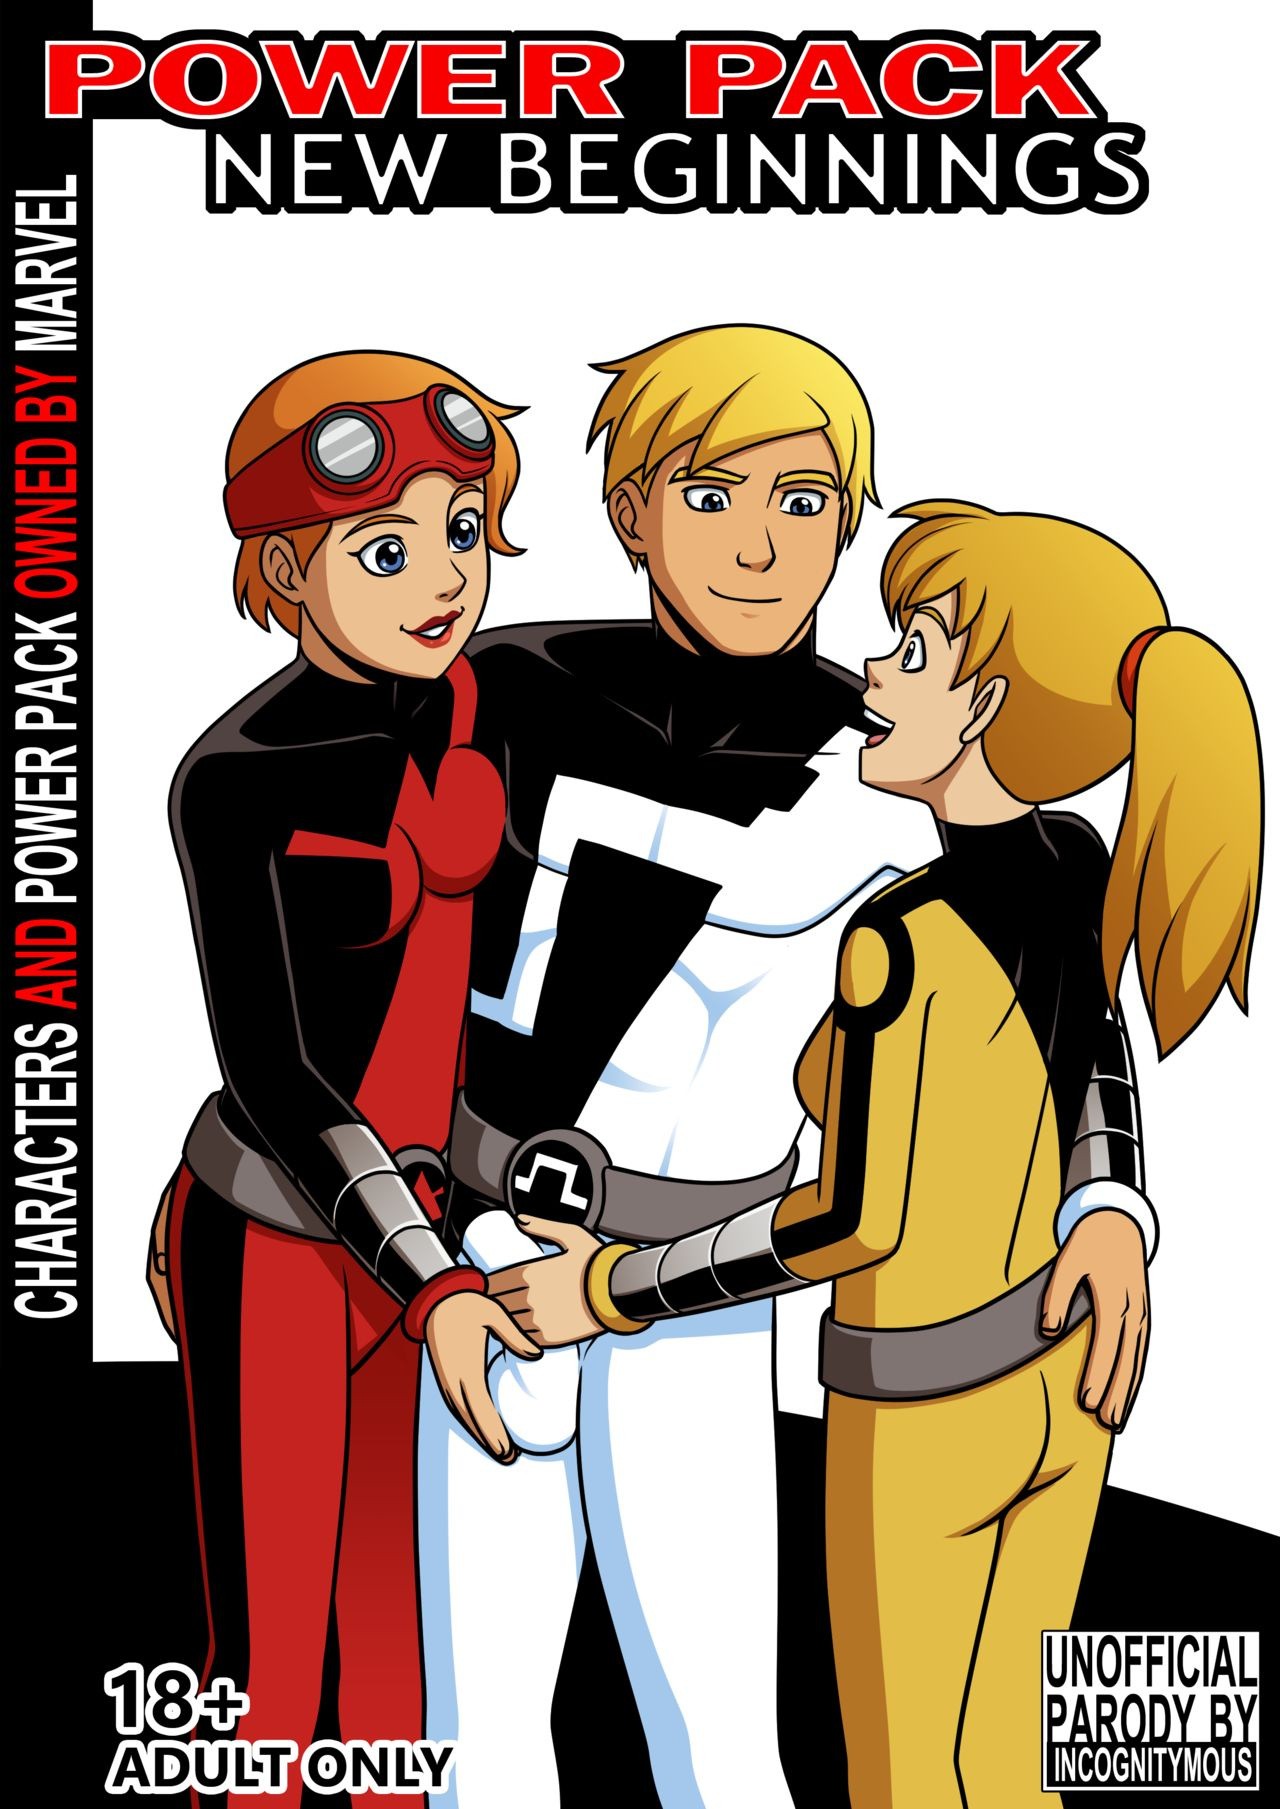 Power Pack - New Beginnings porn comic picture 1